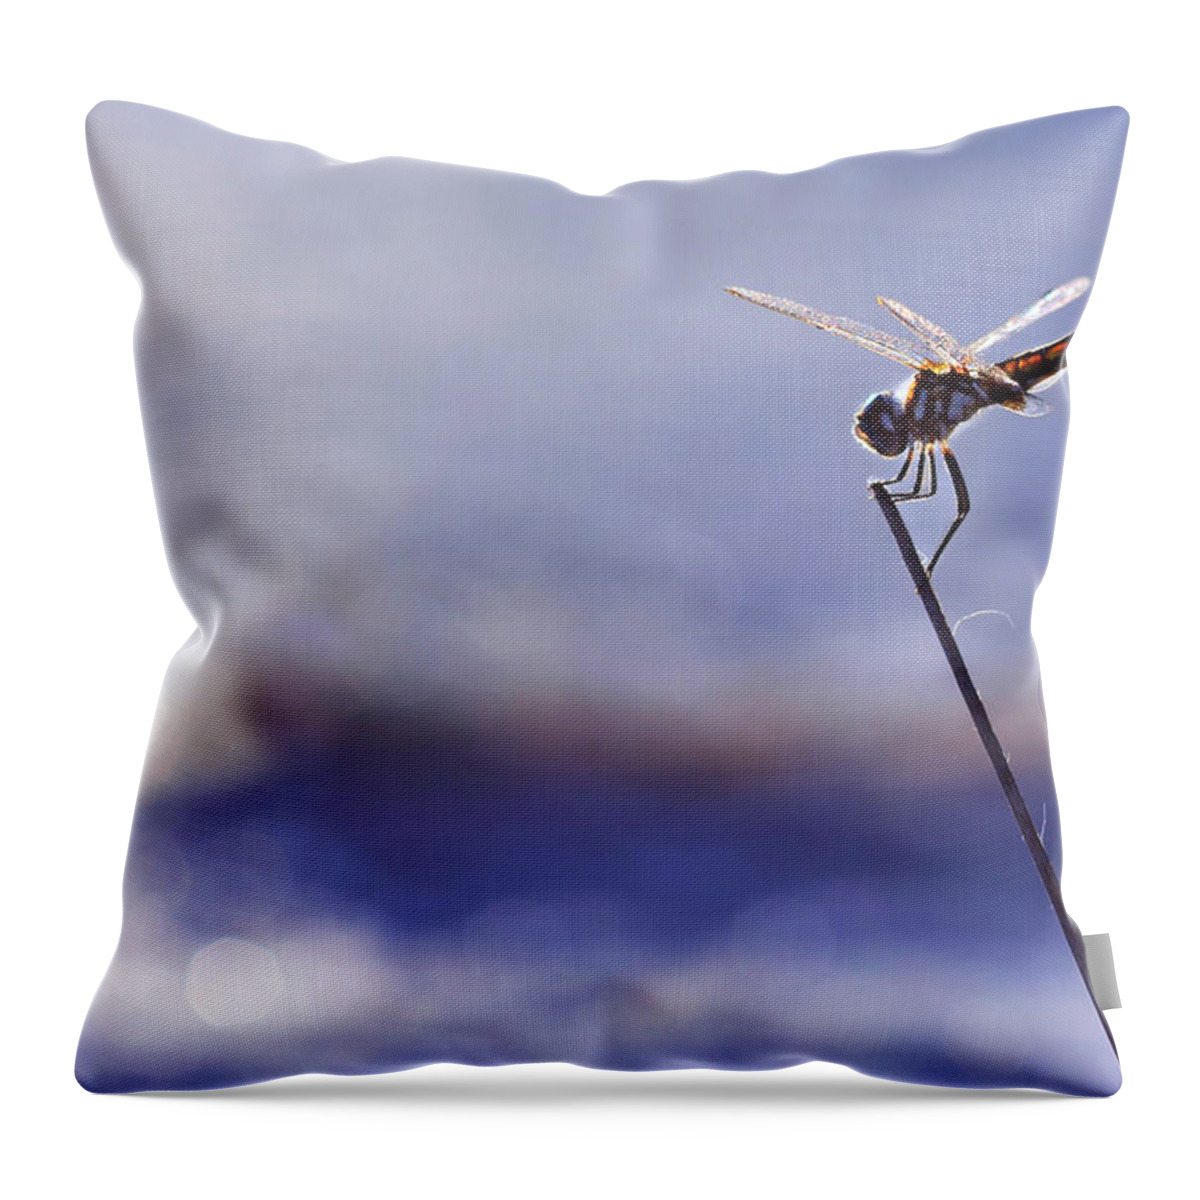 Dragonfly Throw Pillow featuring the photograph Dragonfly Blue by Laura Fasulo